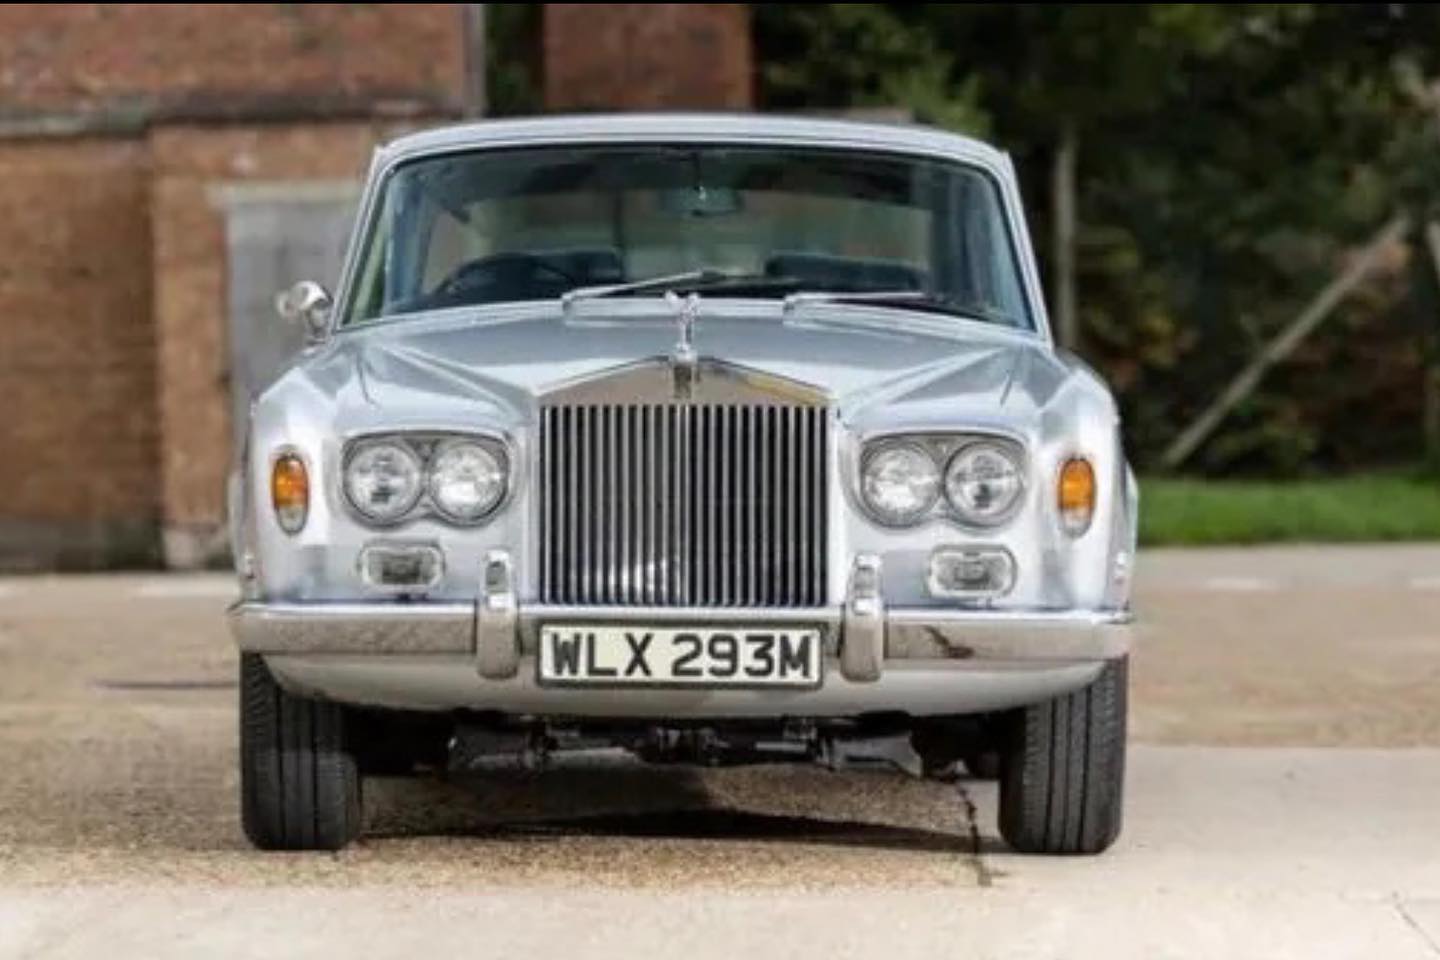 Rolls-Royce Belonging To Freddie Mercury At Auction For Charity Project In Ukraine - DSF Antique Jewelry